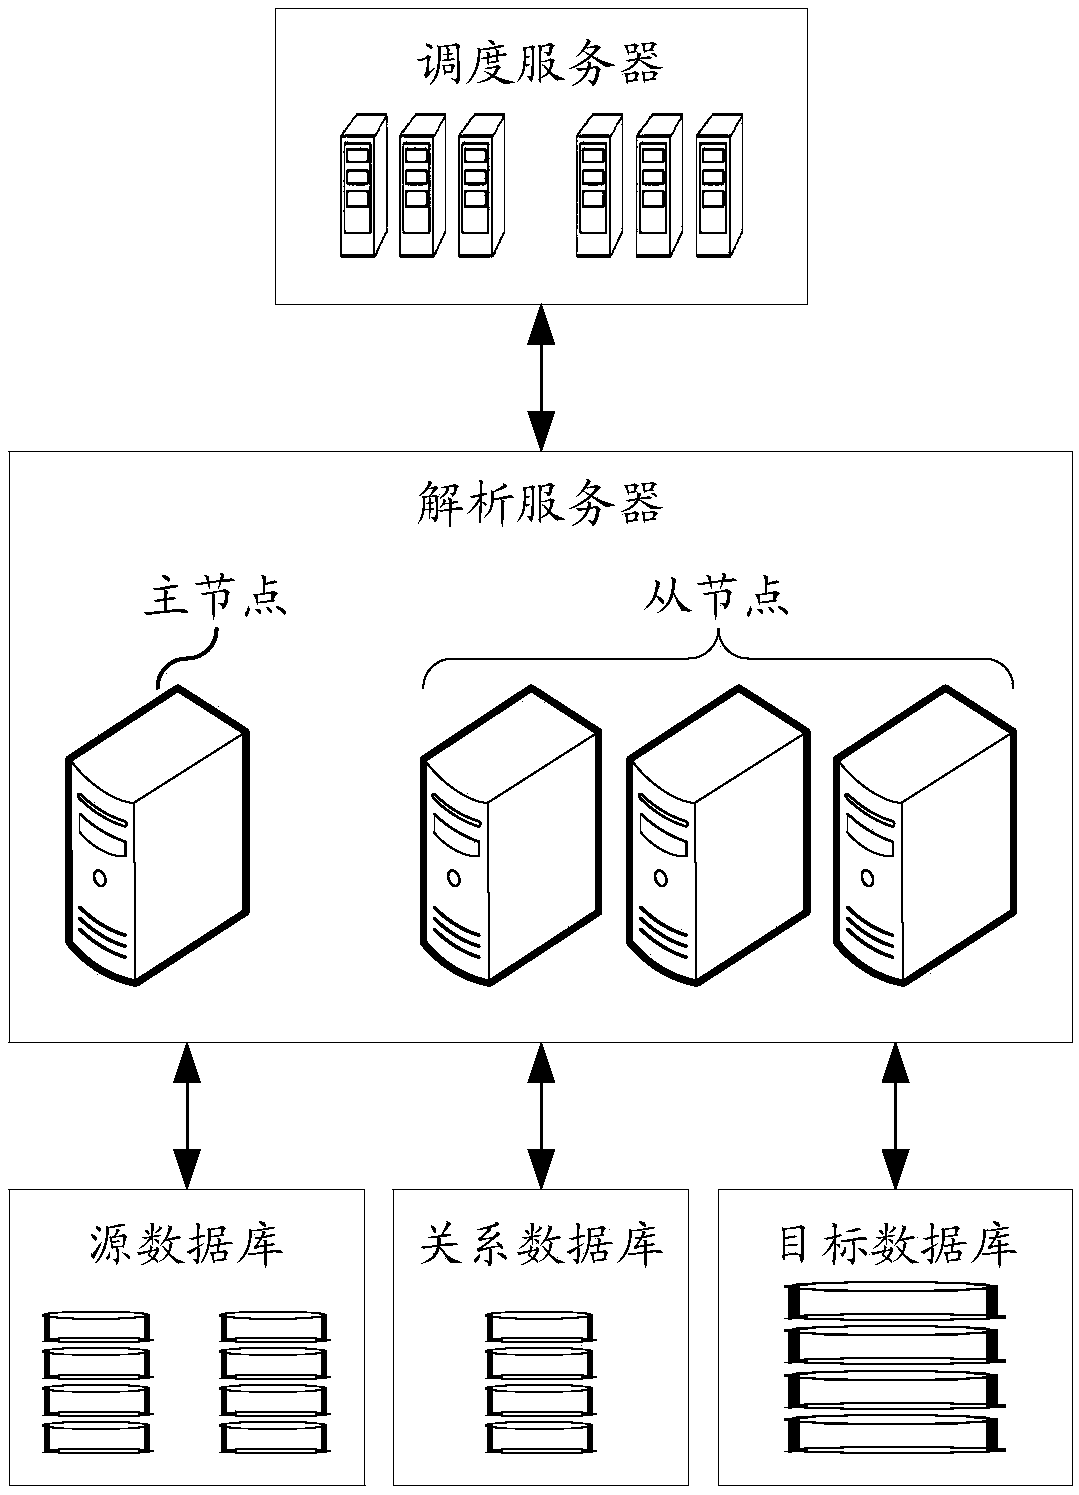 File analysis method and network device